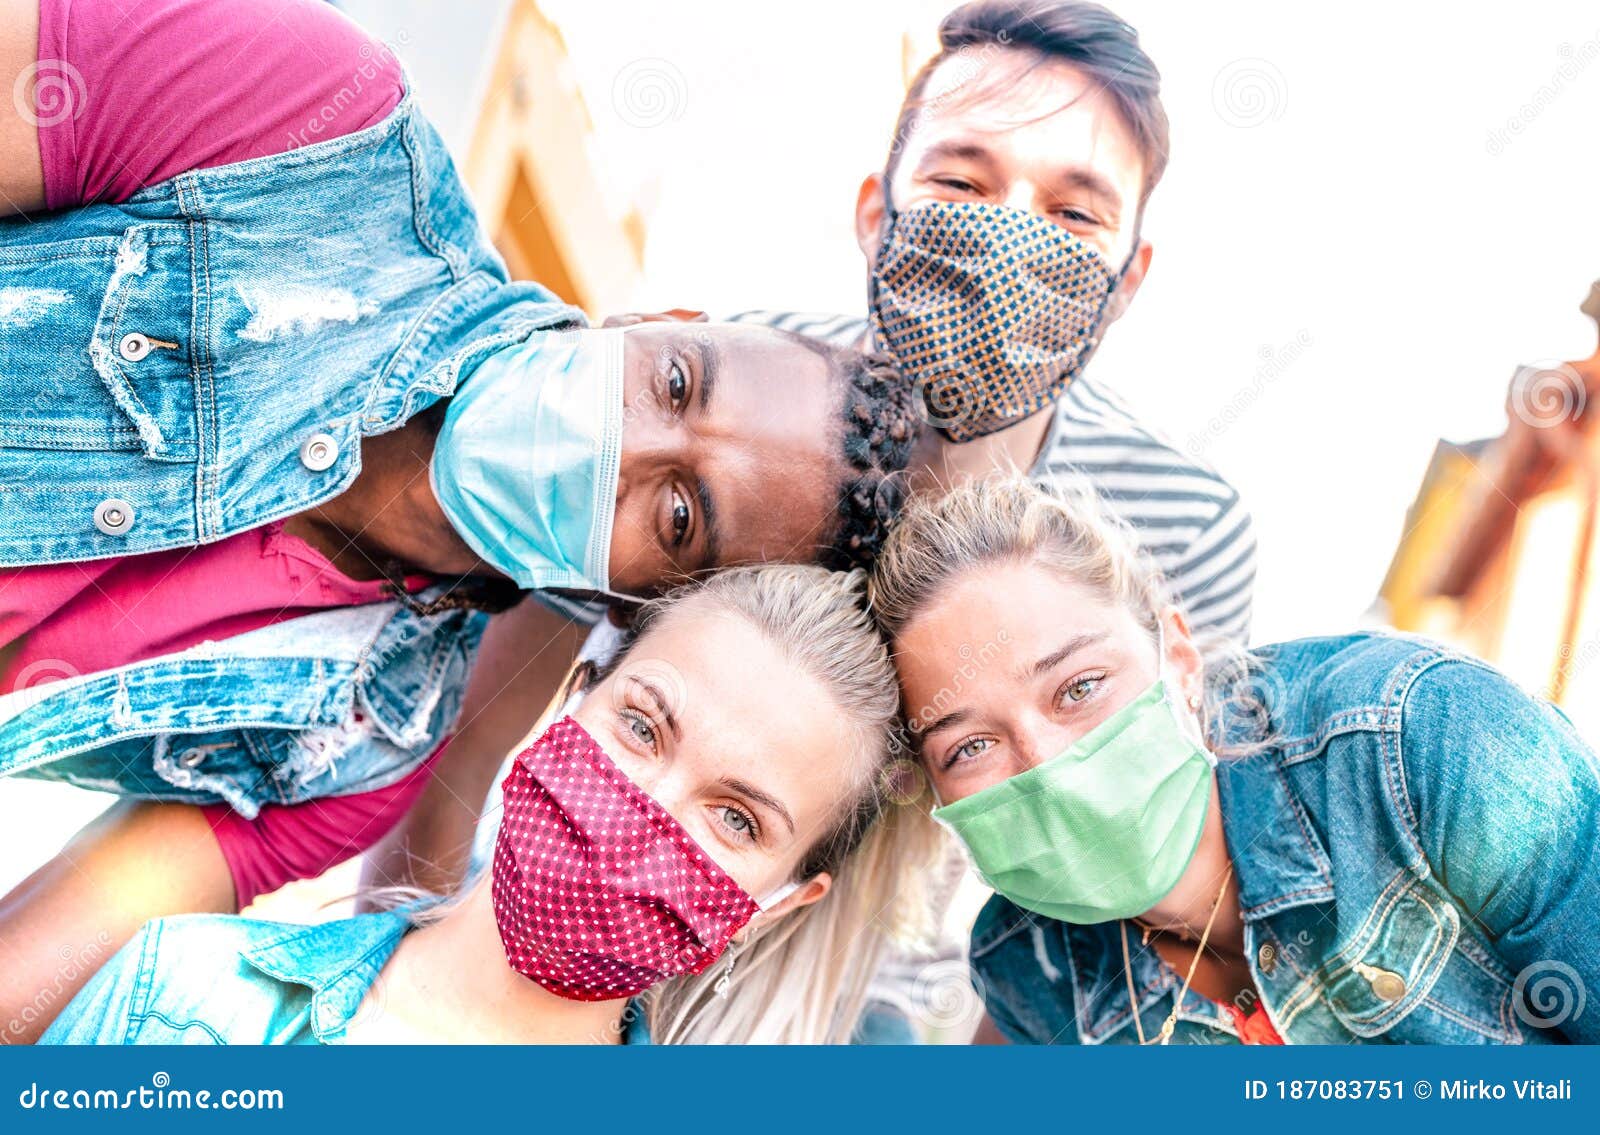 multiracial millenial friends taking selfie smiling behind face masks - happy friendship and new normal concept with young people